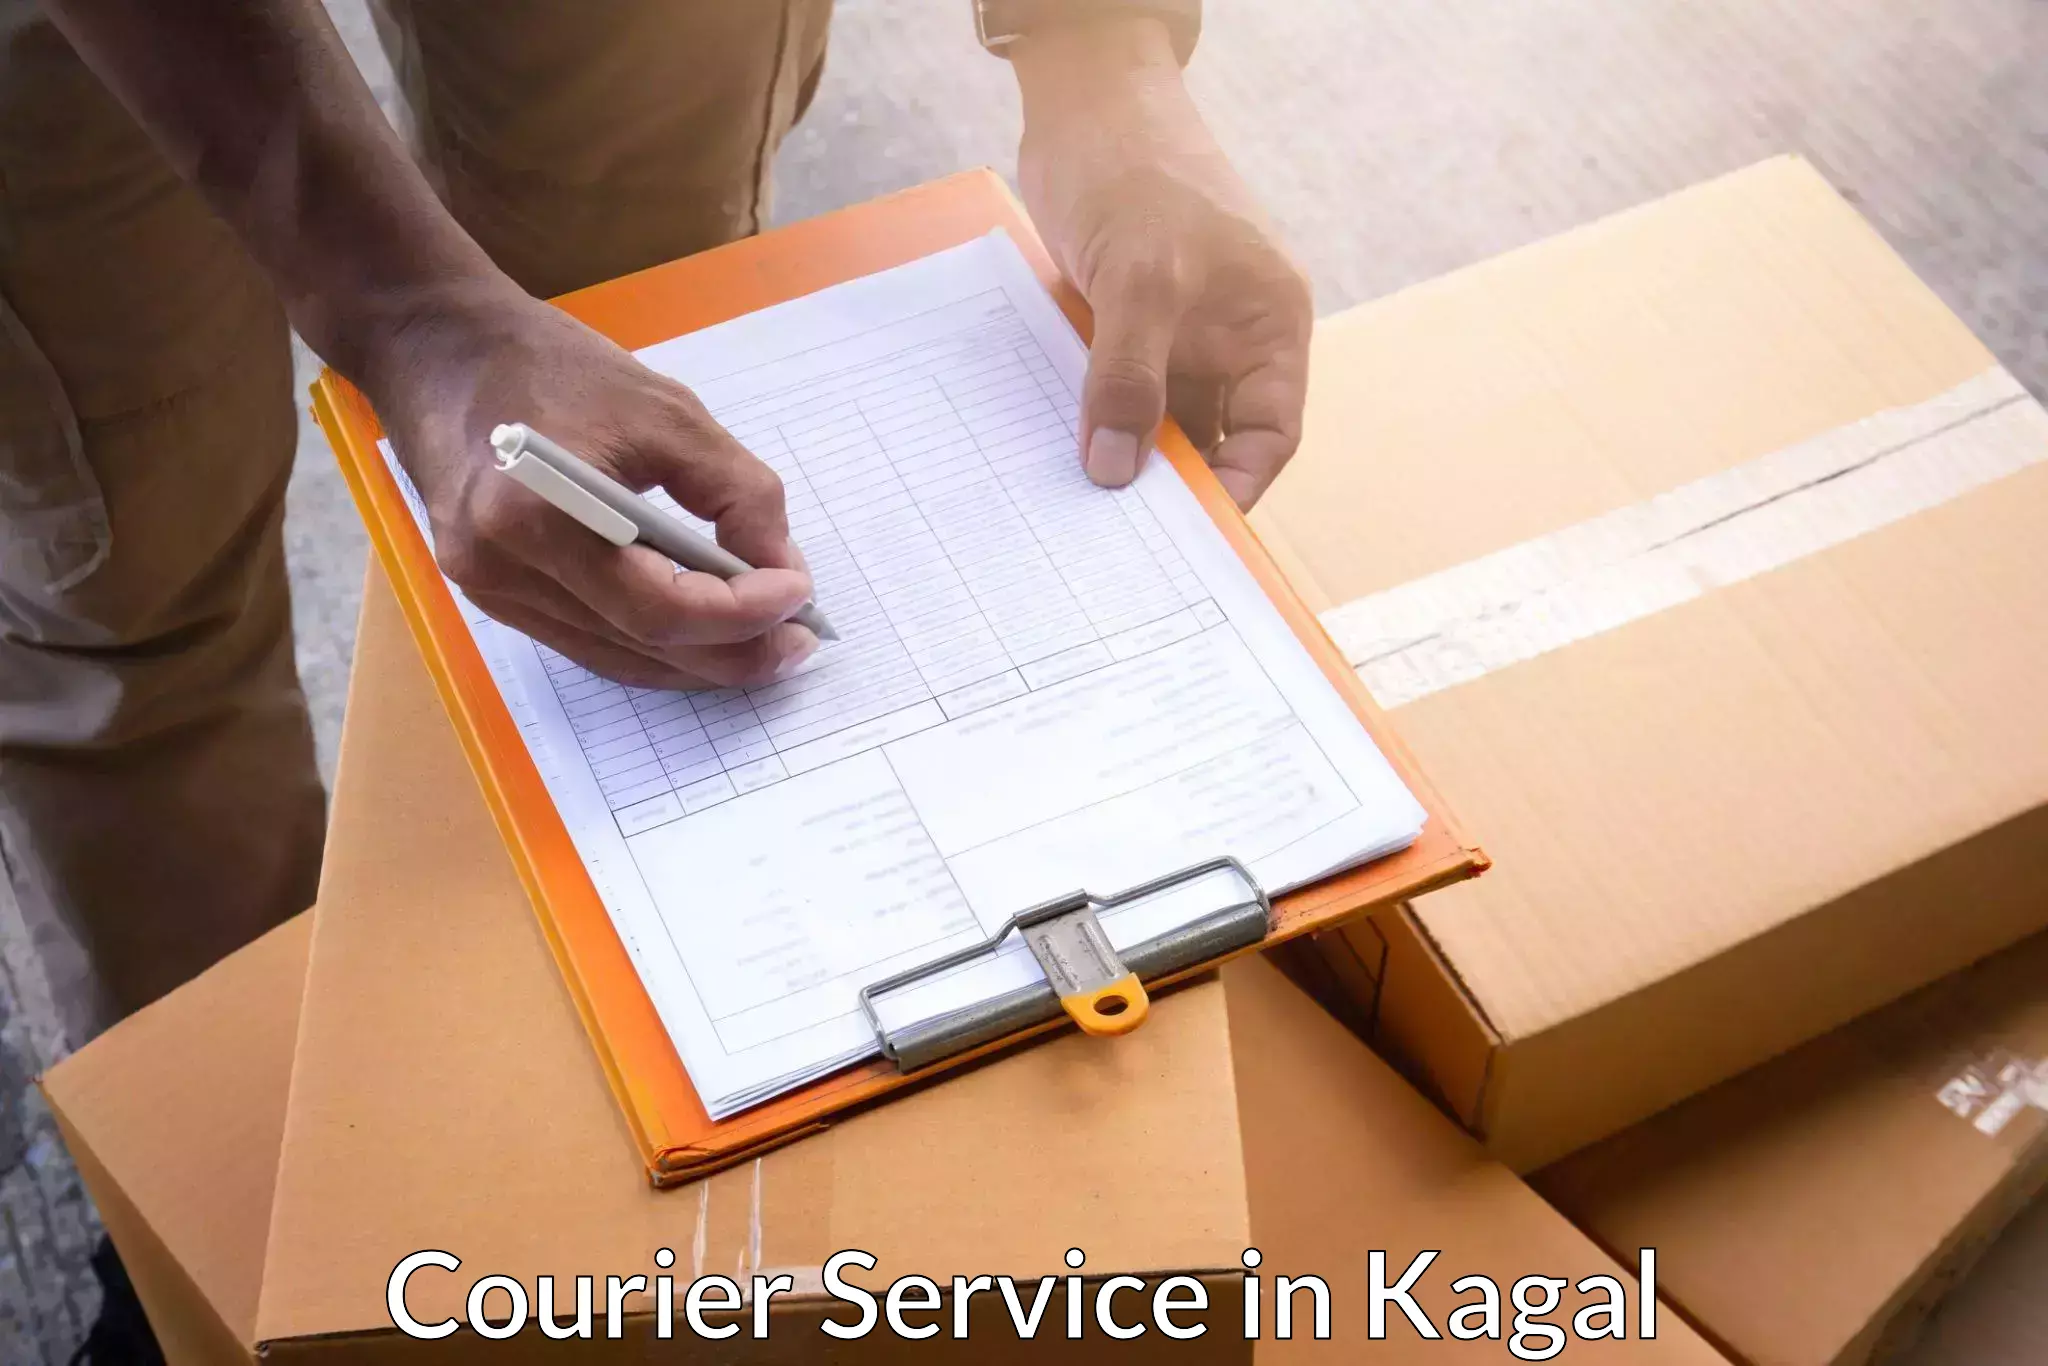 Affordable parcel service in Kagal